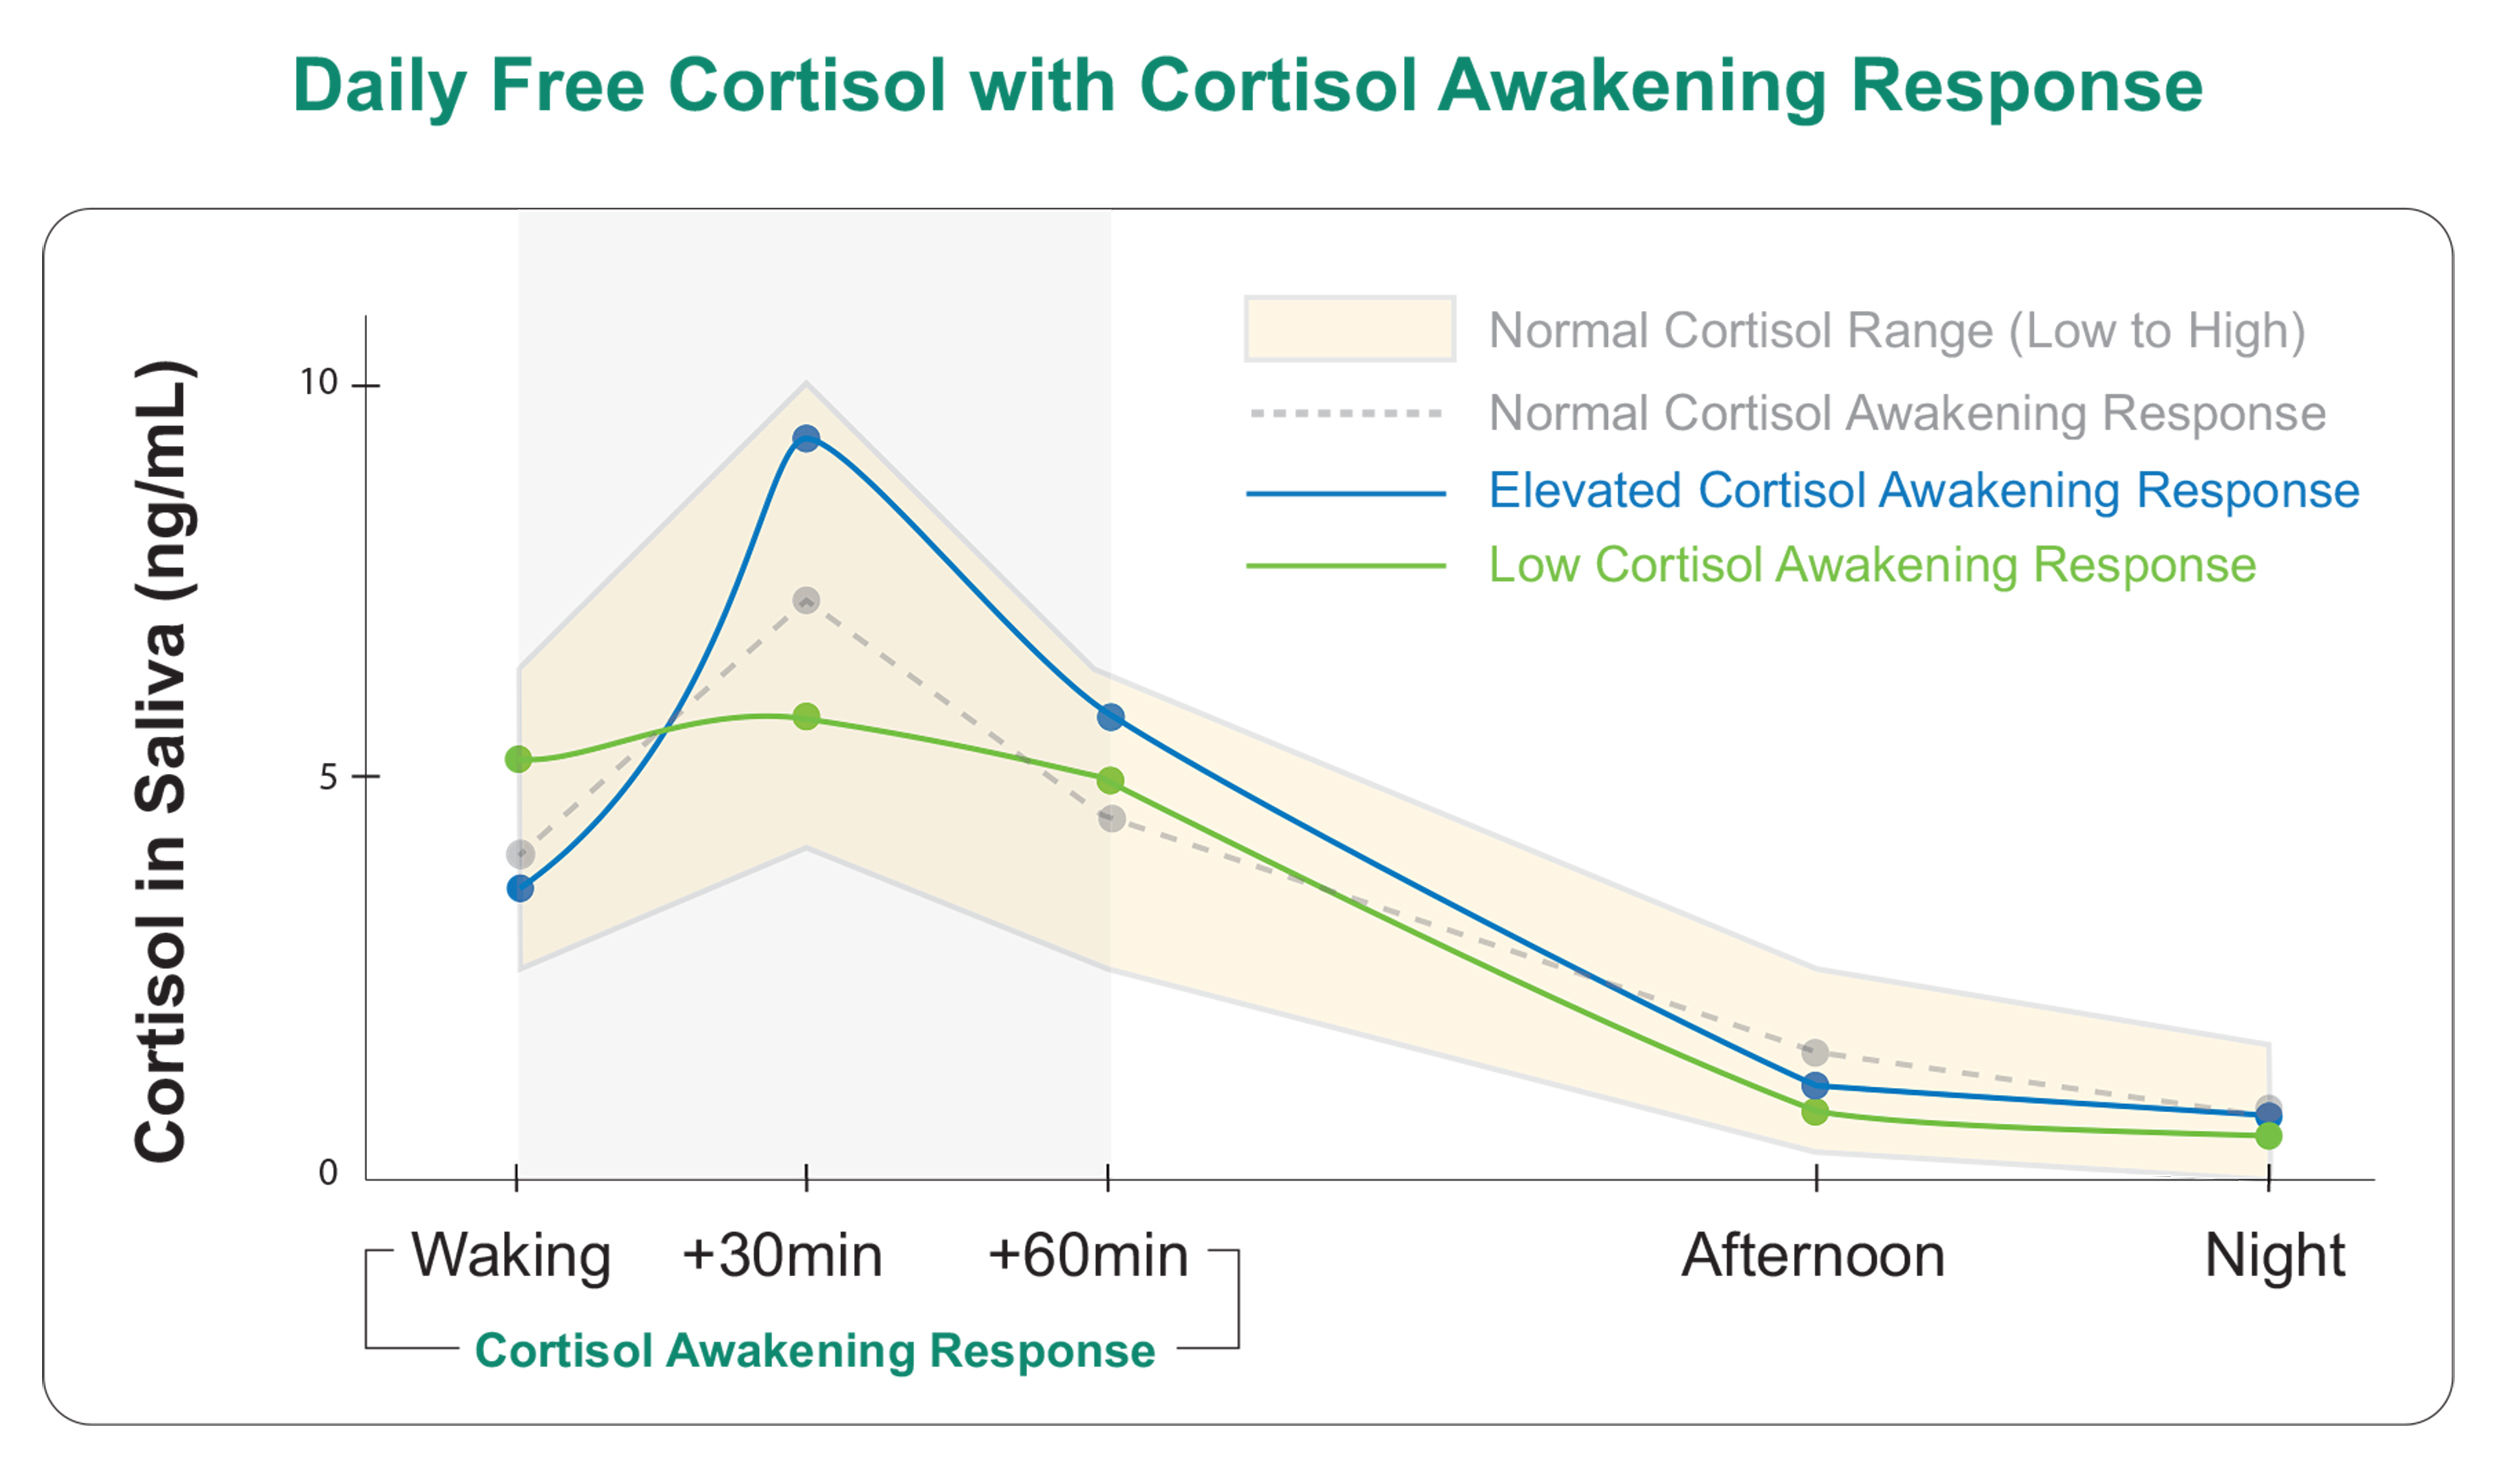 Daily Free Cortisol graph